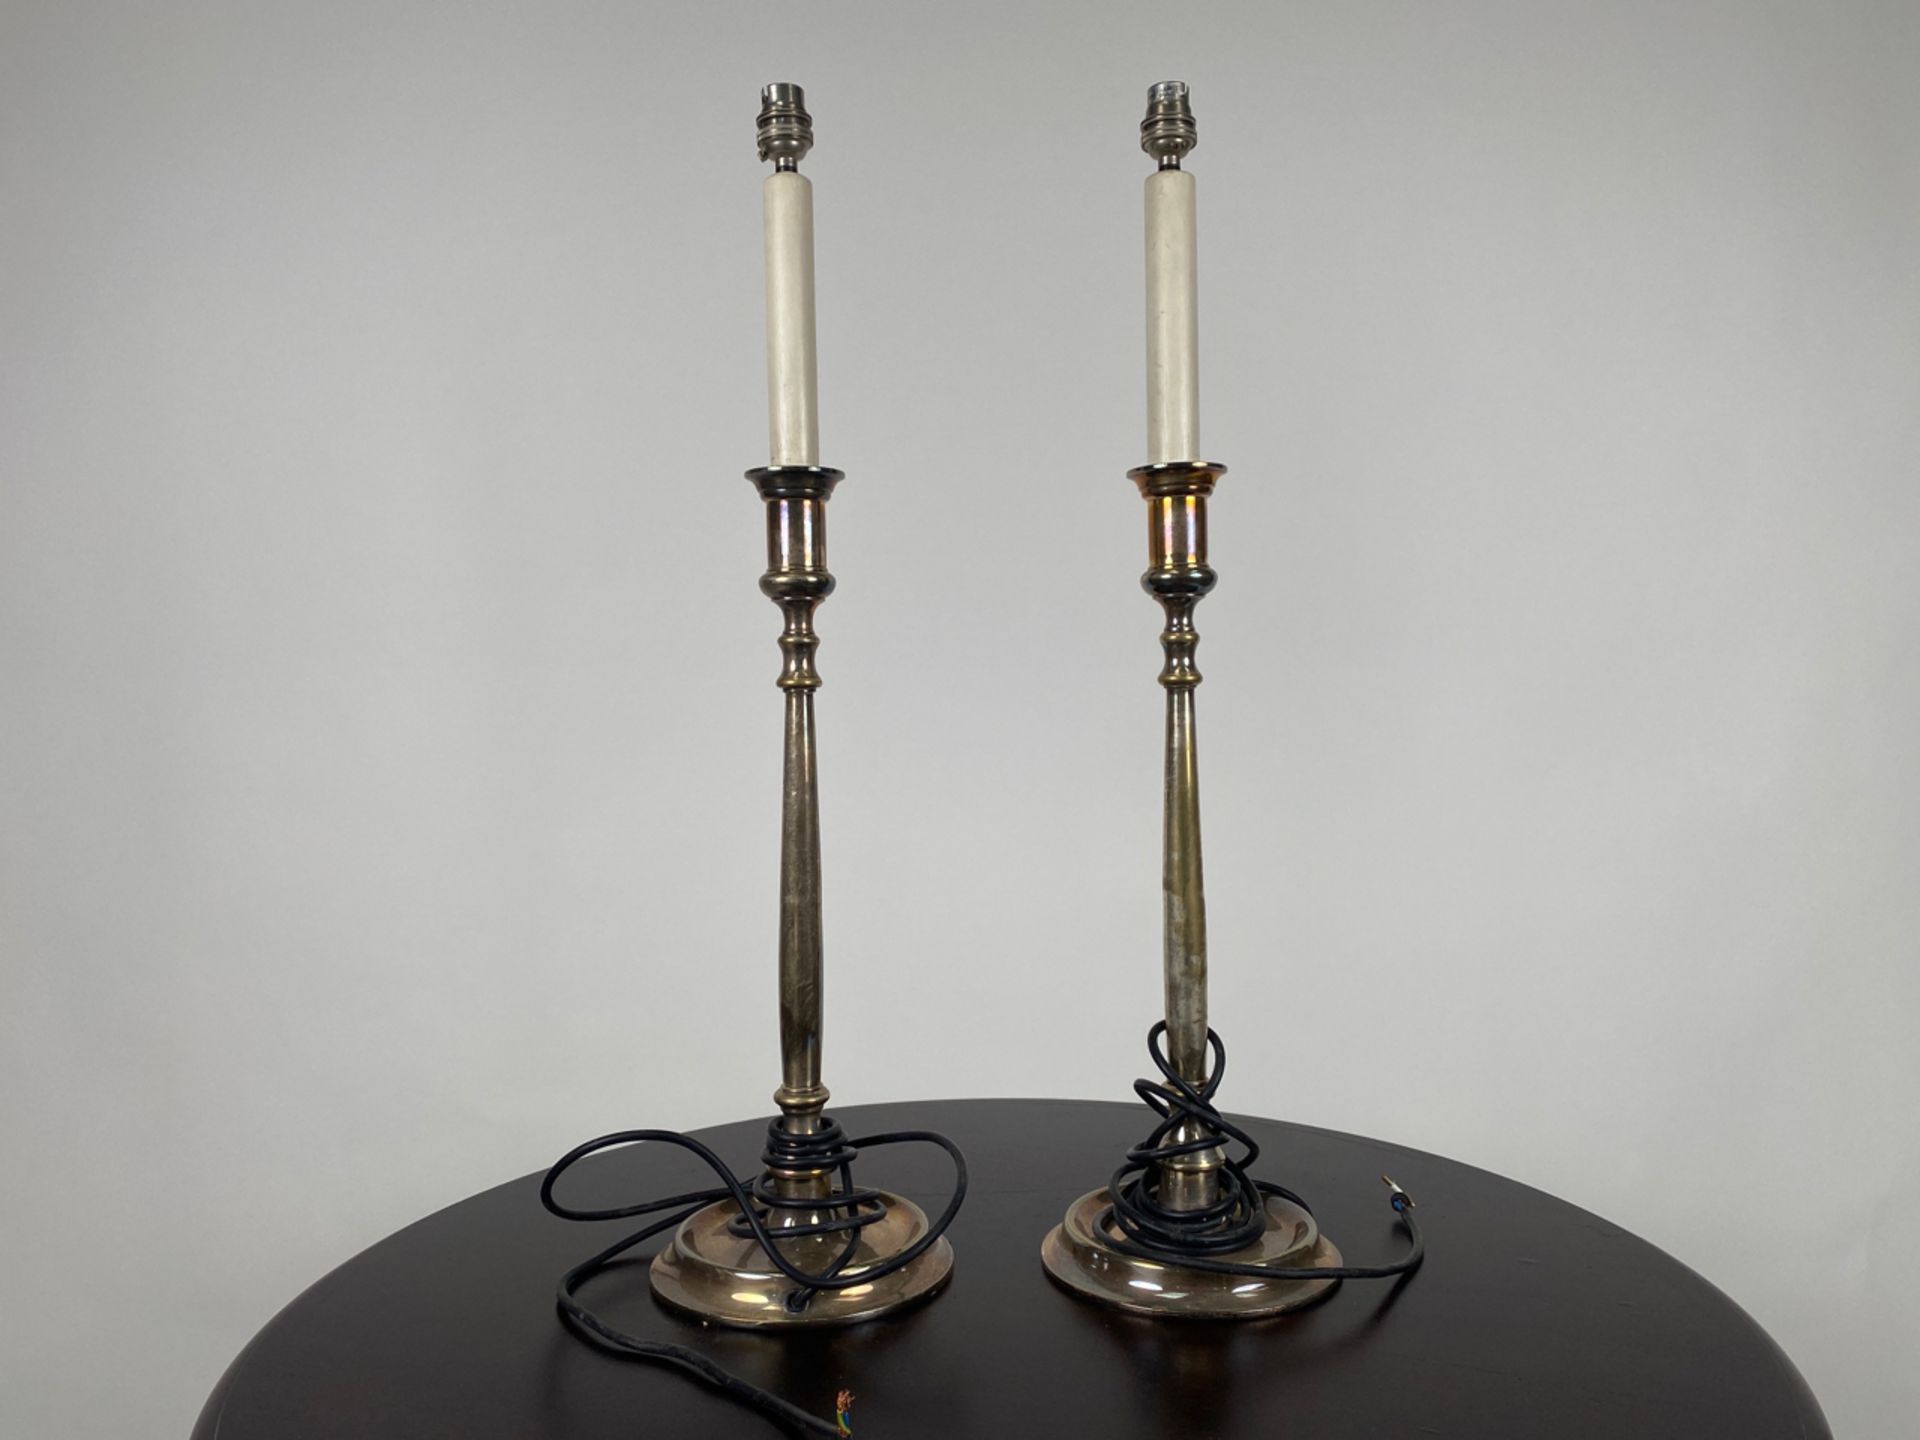 Pair of Nickel Plated Table Lamps